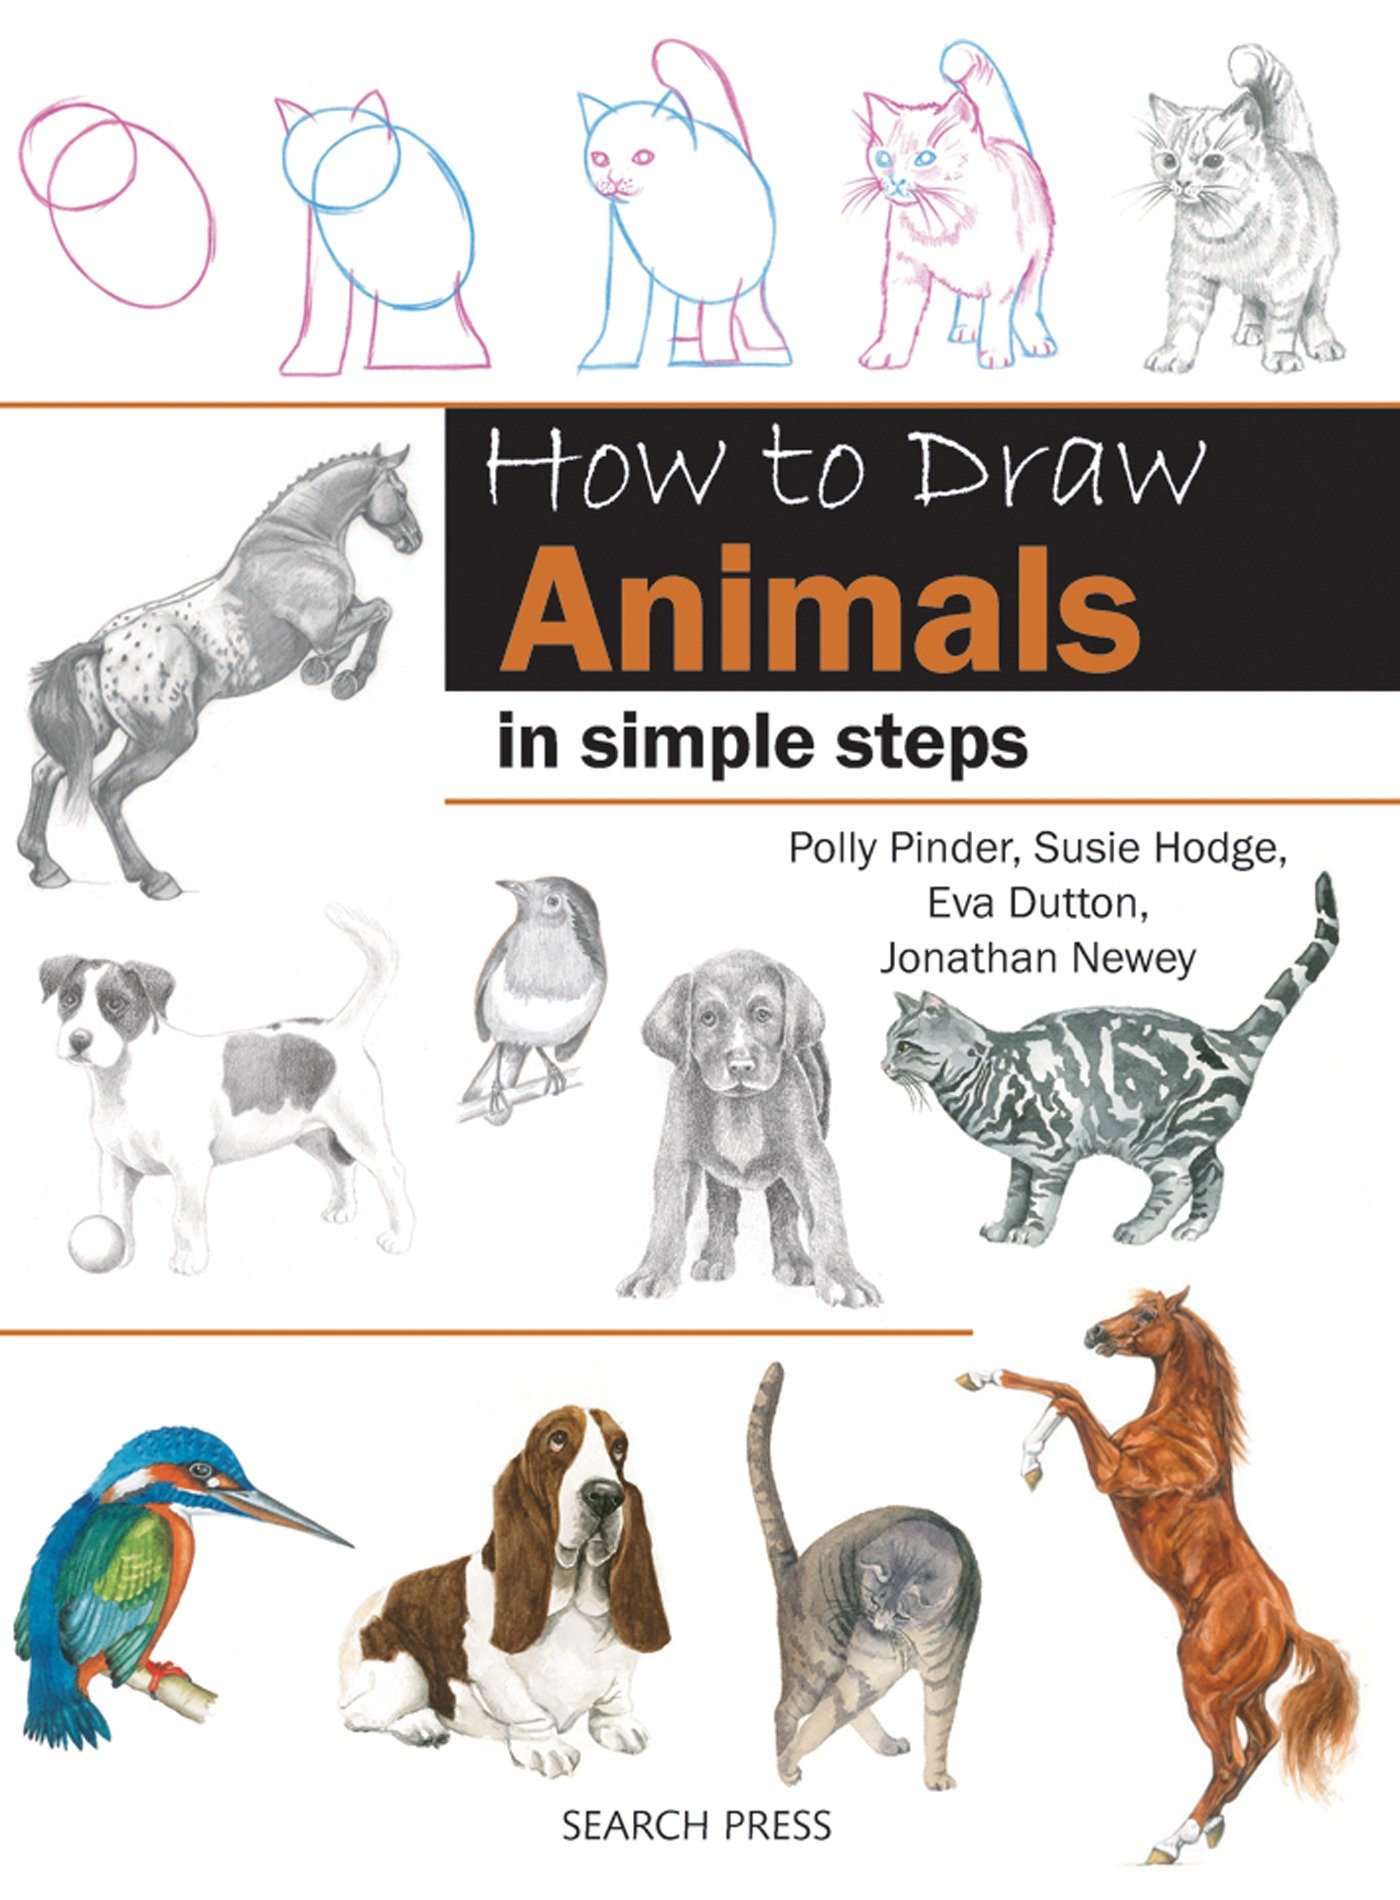 How to Draw Animals Step by Step Book